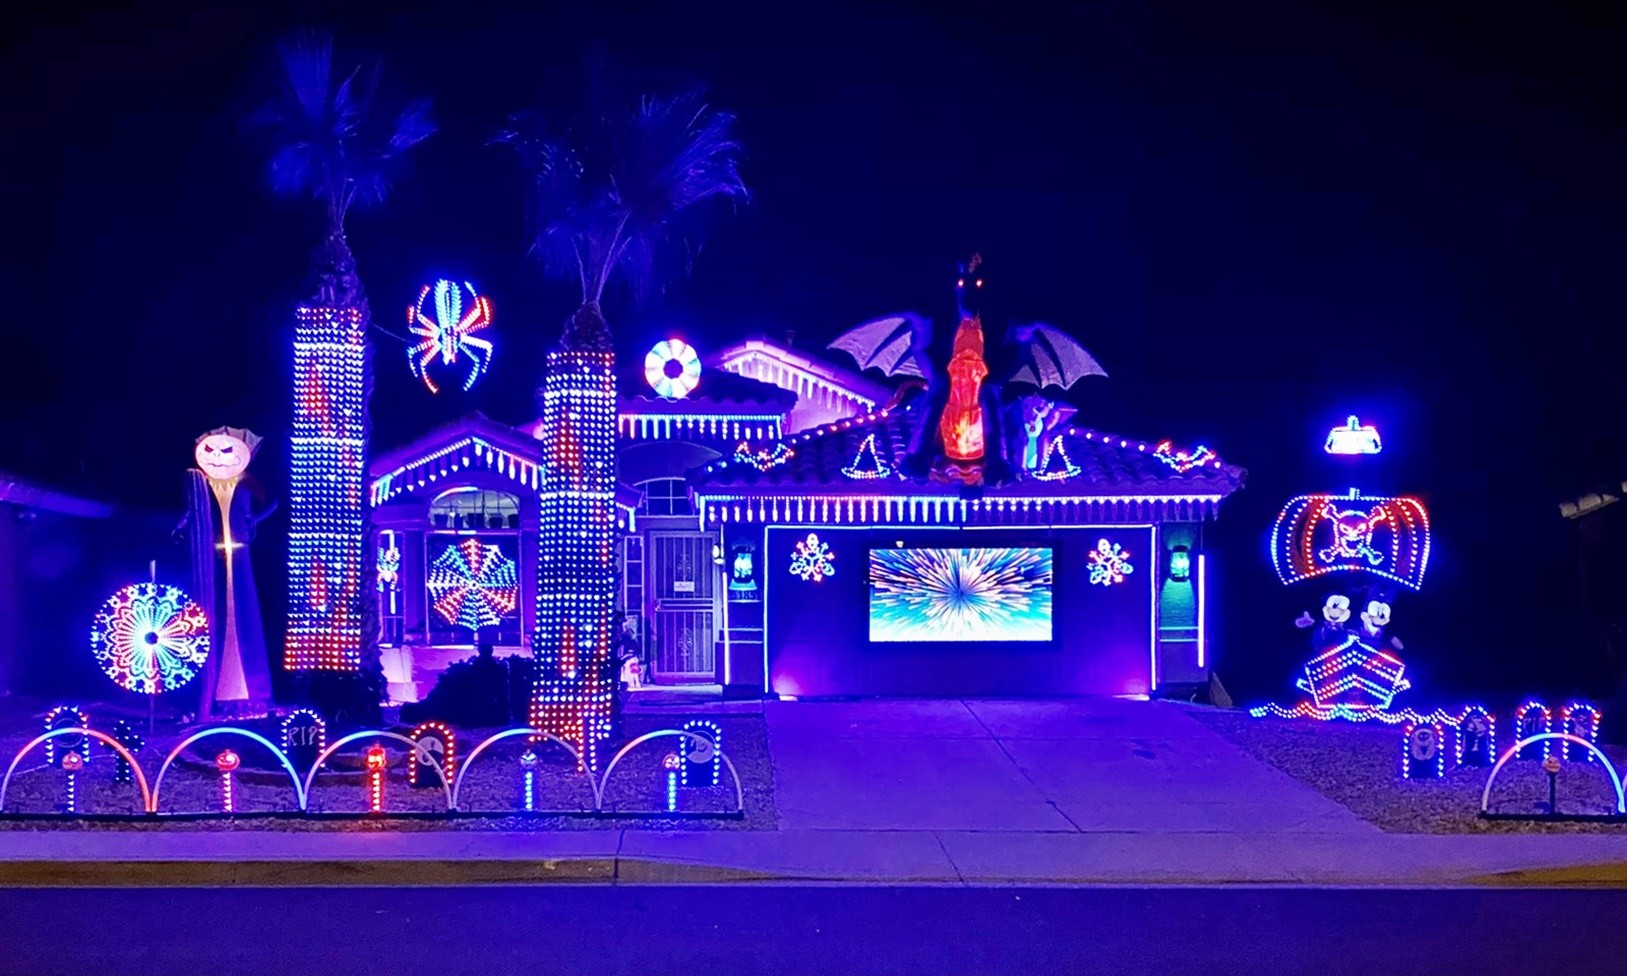 Insane Halloween house lights up in time to Macklemore's 'Downtown